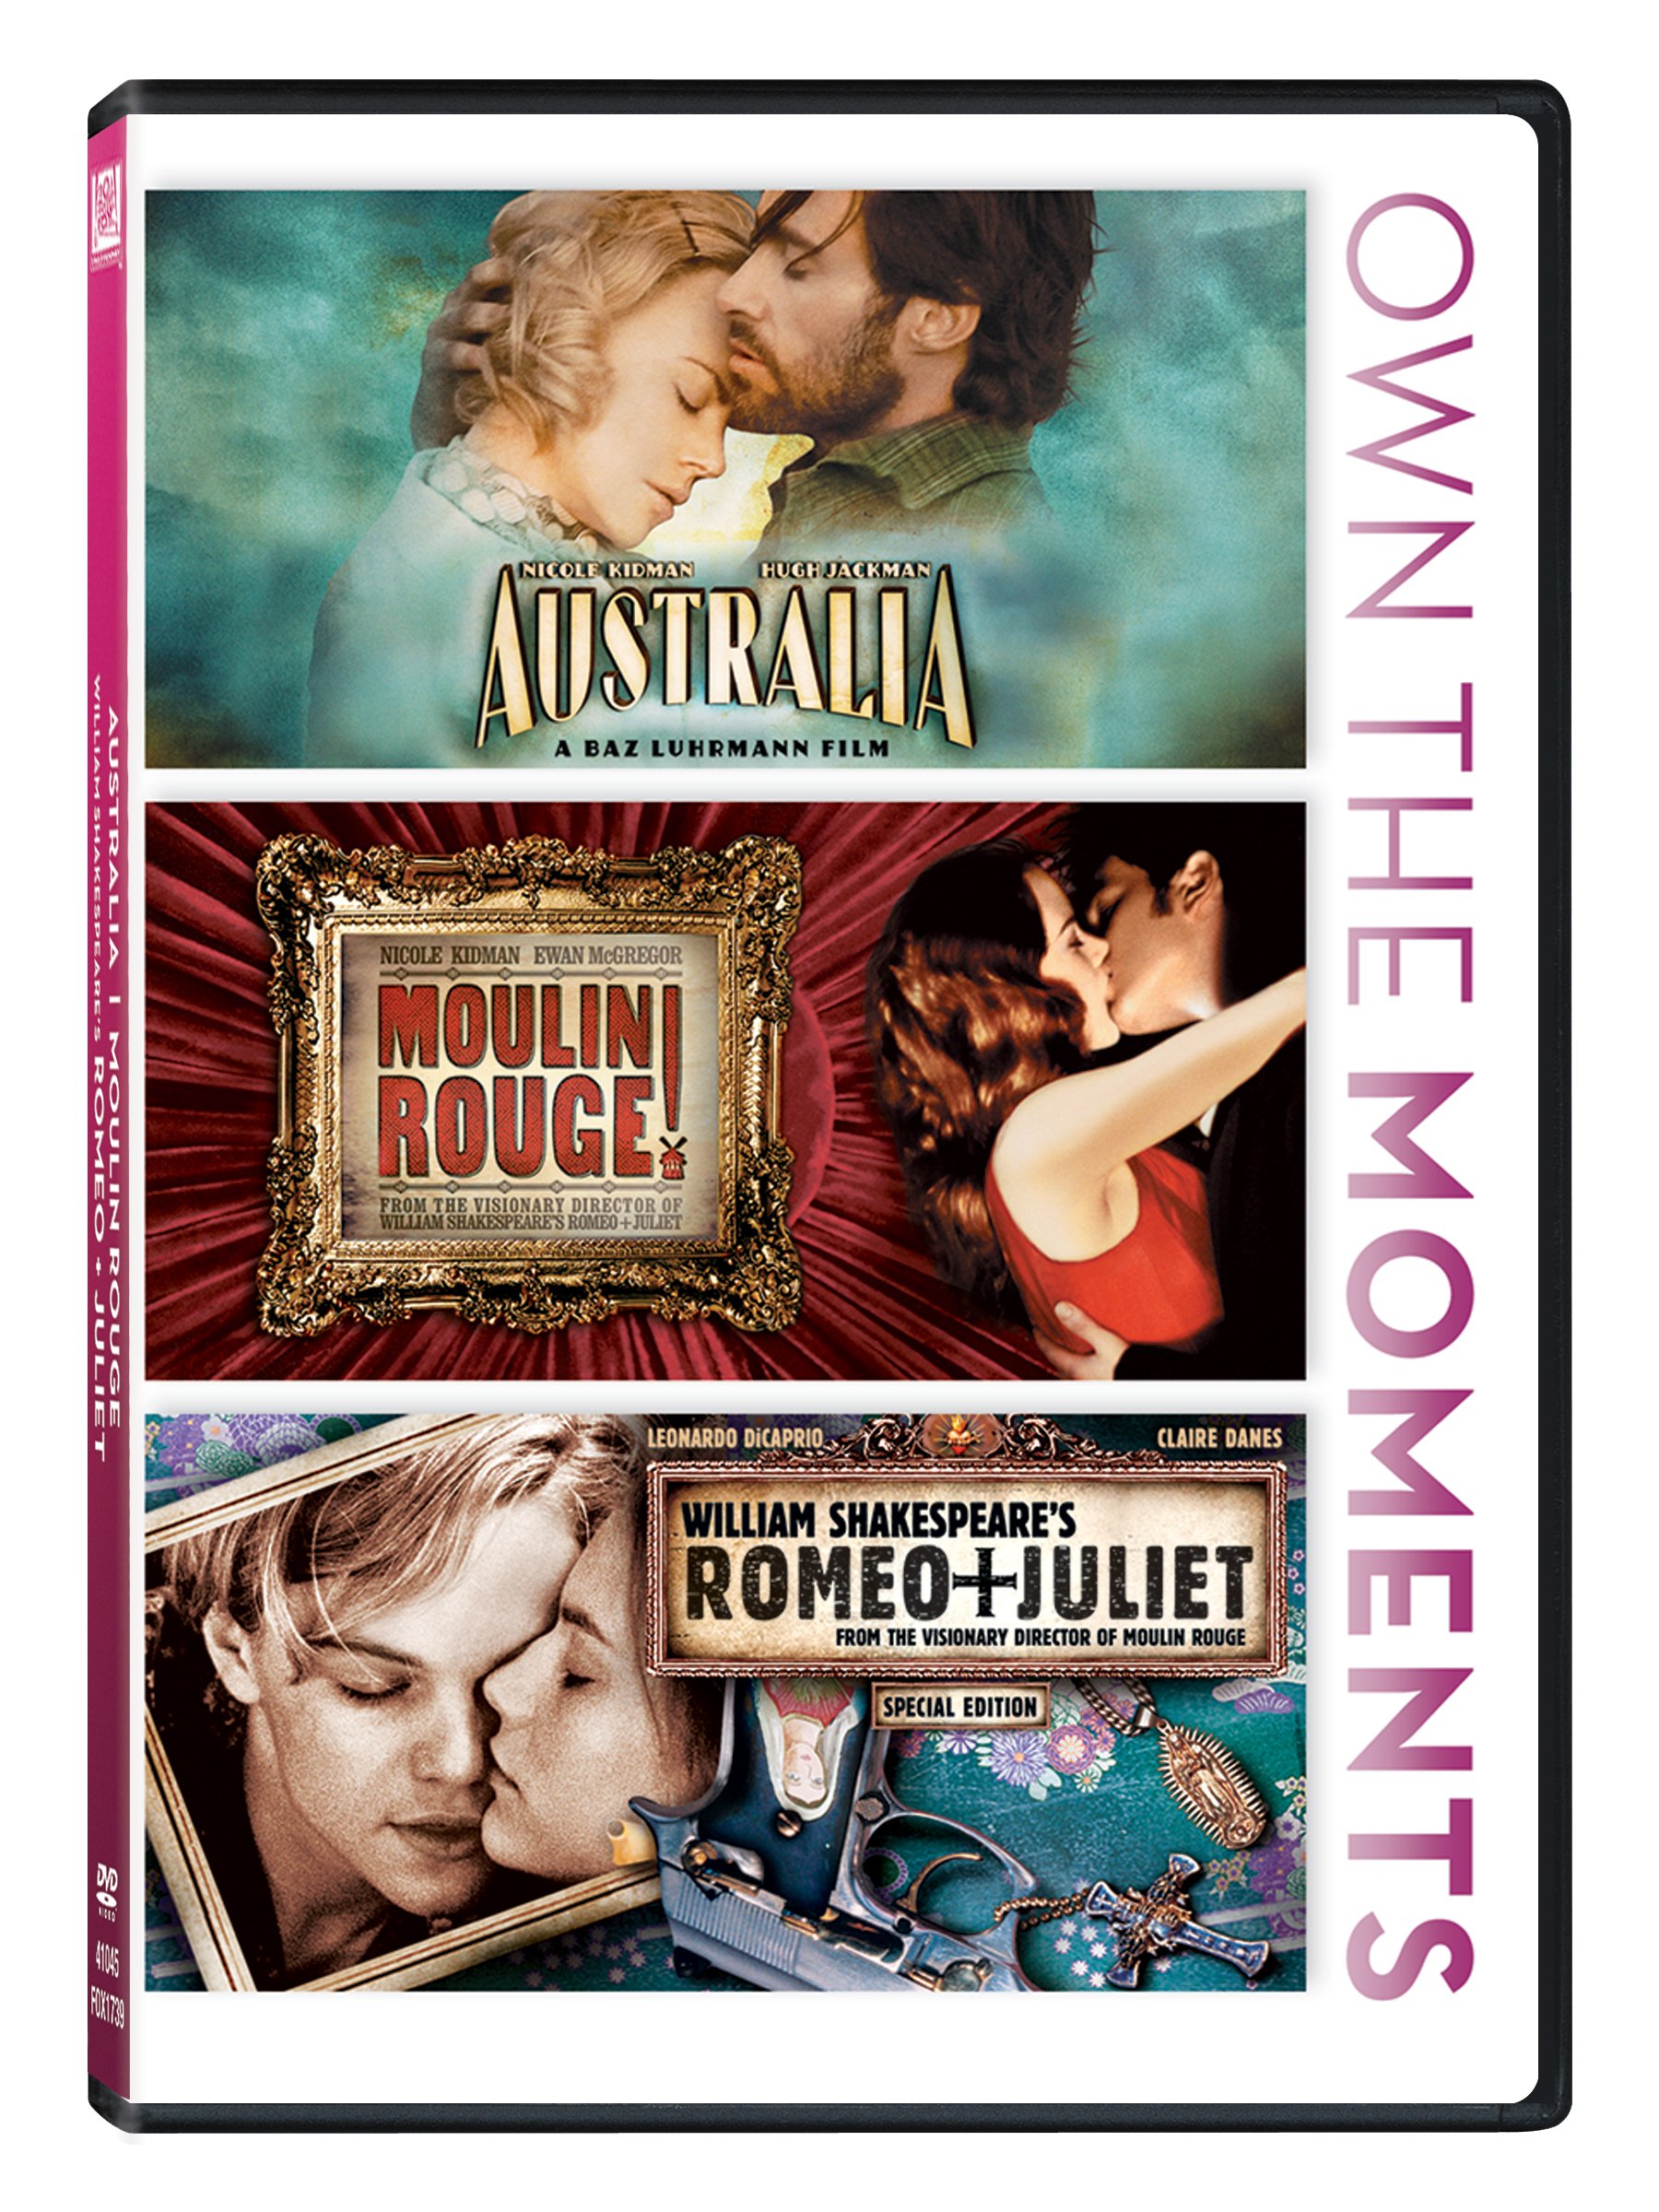 own-the-moments-3-movies-collection-australia-moulin-rouge-romeo-juliet